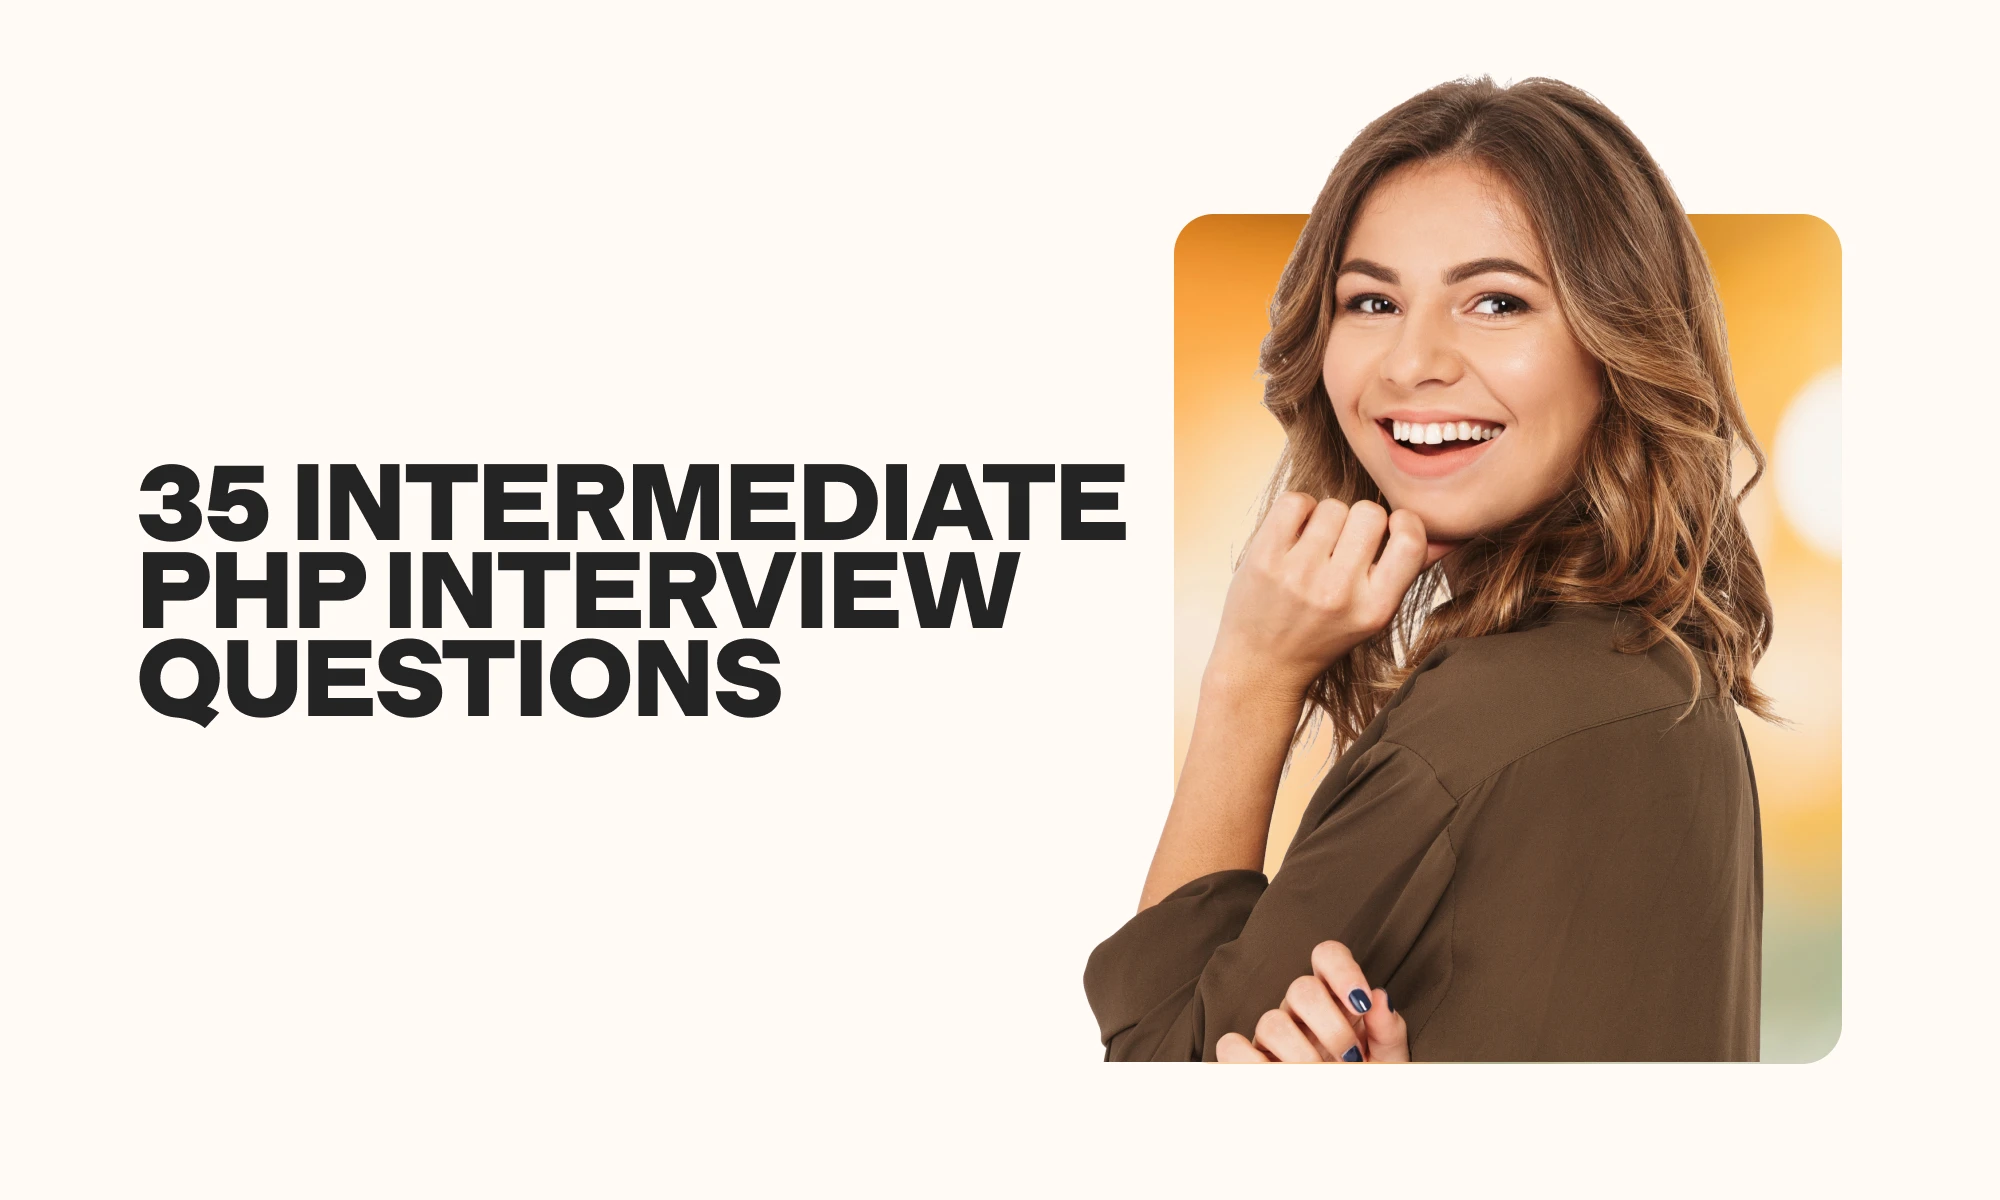 35 intermediate PHP interview questions